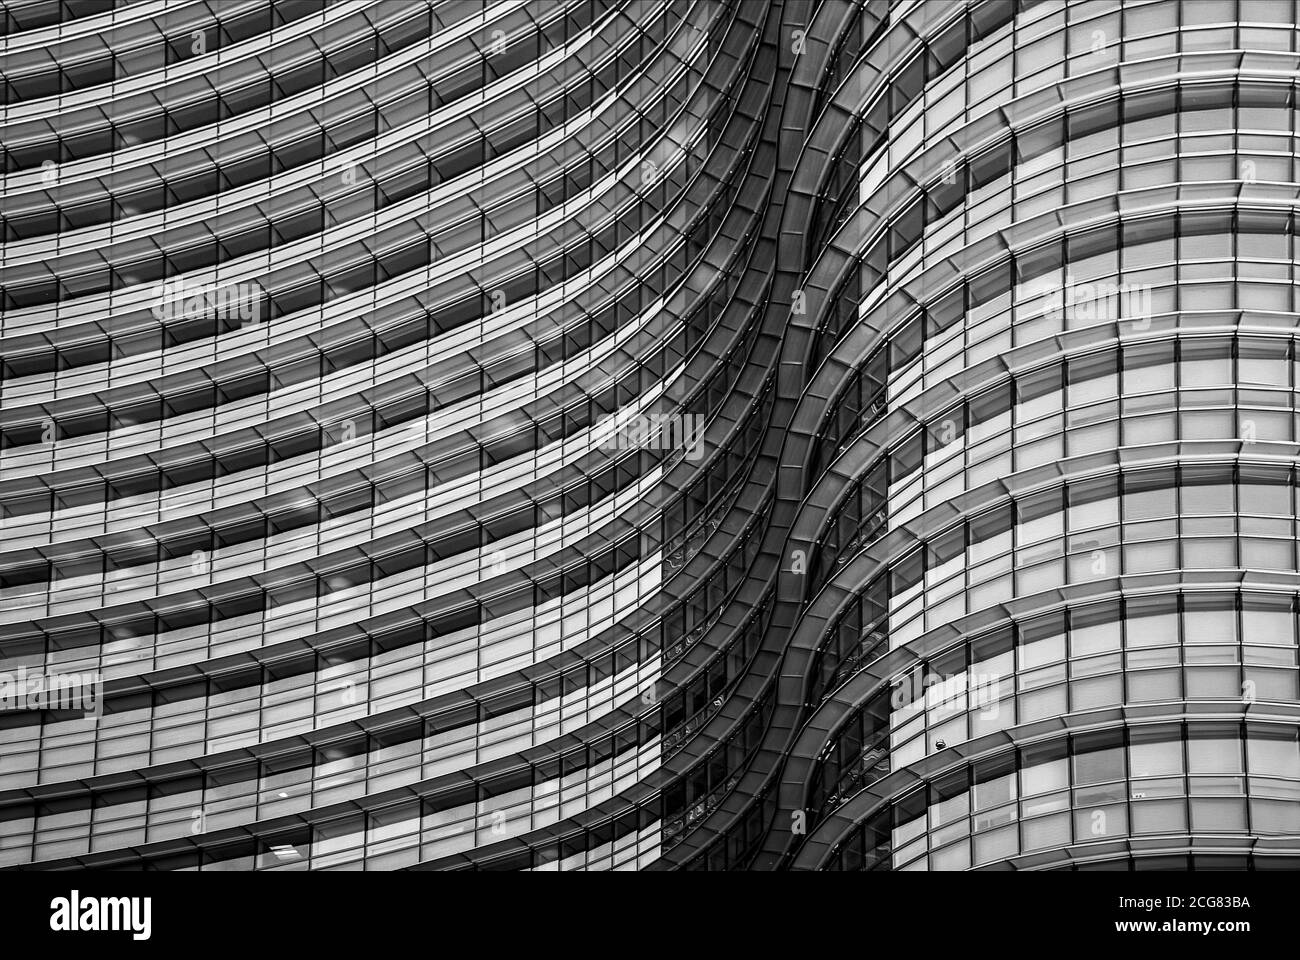 Milan/Italy- July 14, 2016: detail of the modern glass Unicredit tower in new Porta Nuova business district, the tallest skyscraper in Italy Stock Photo